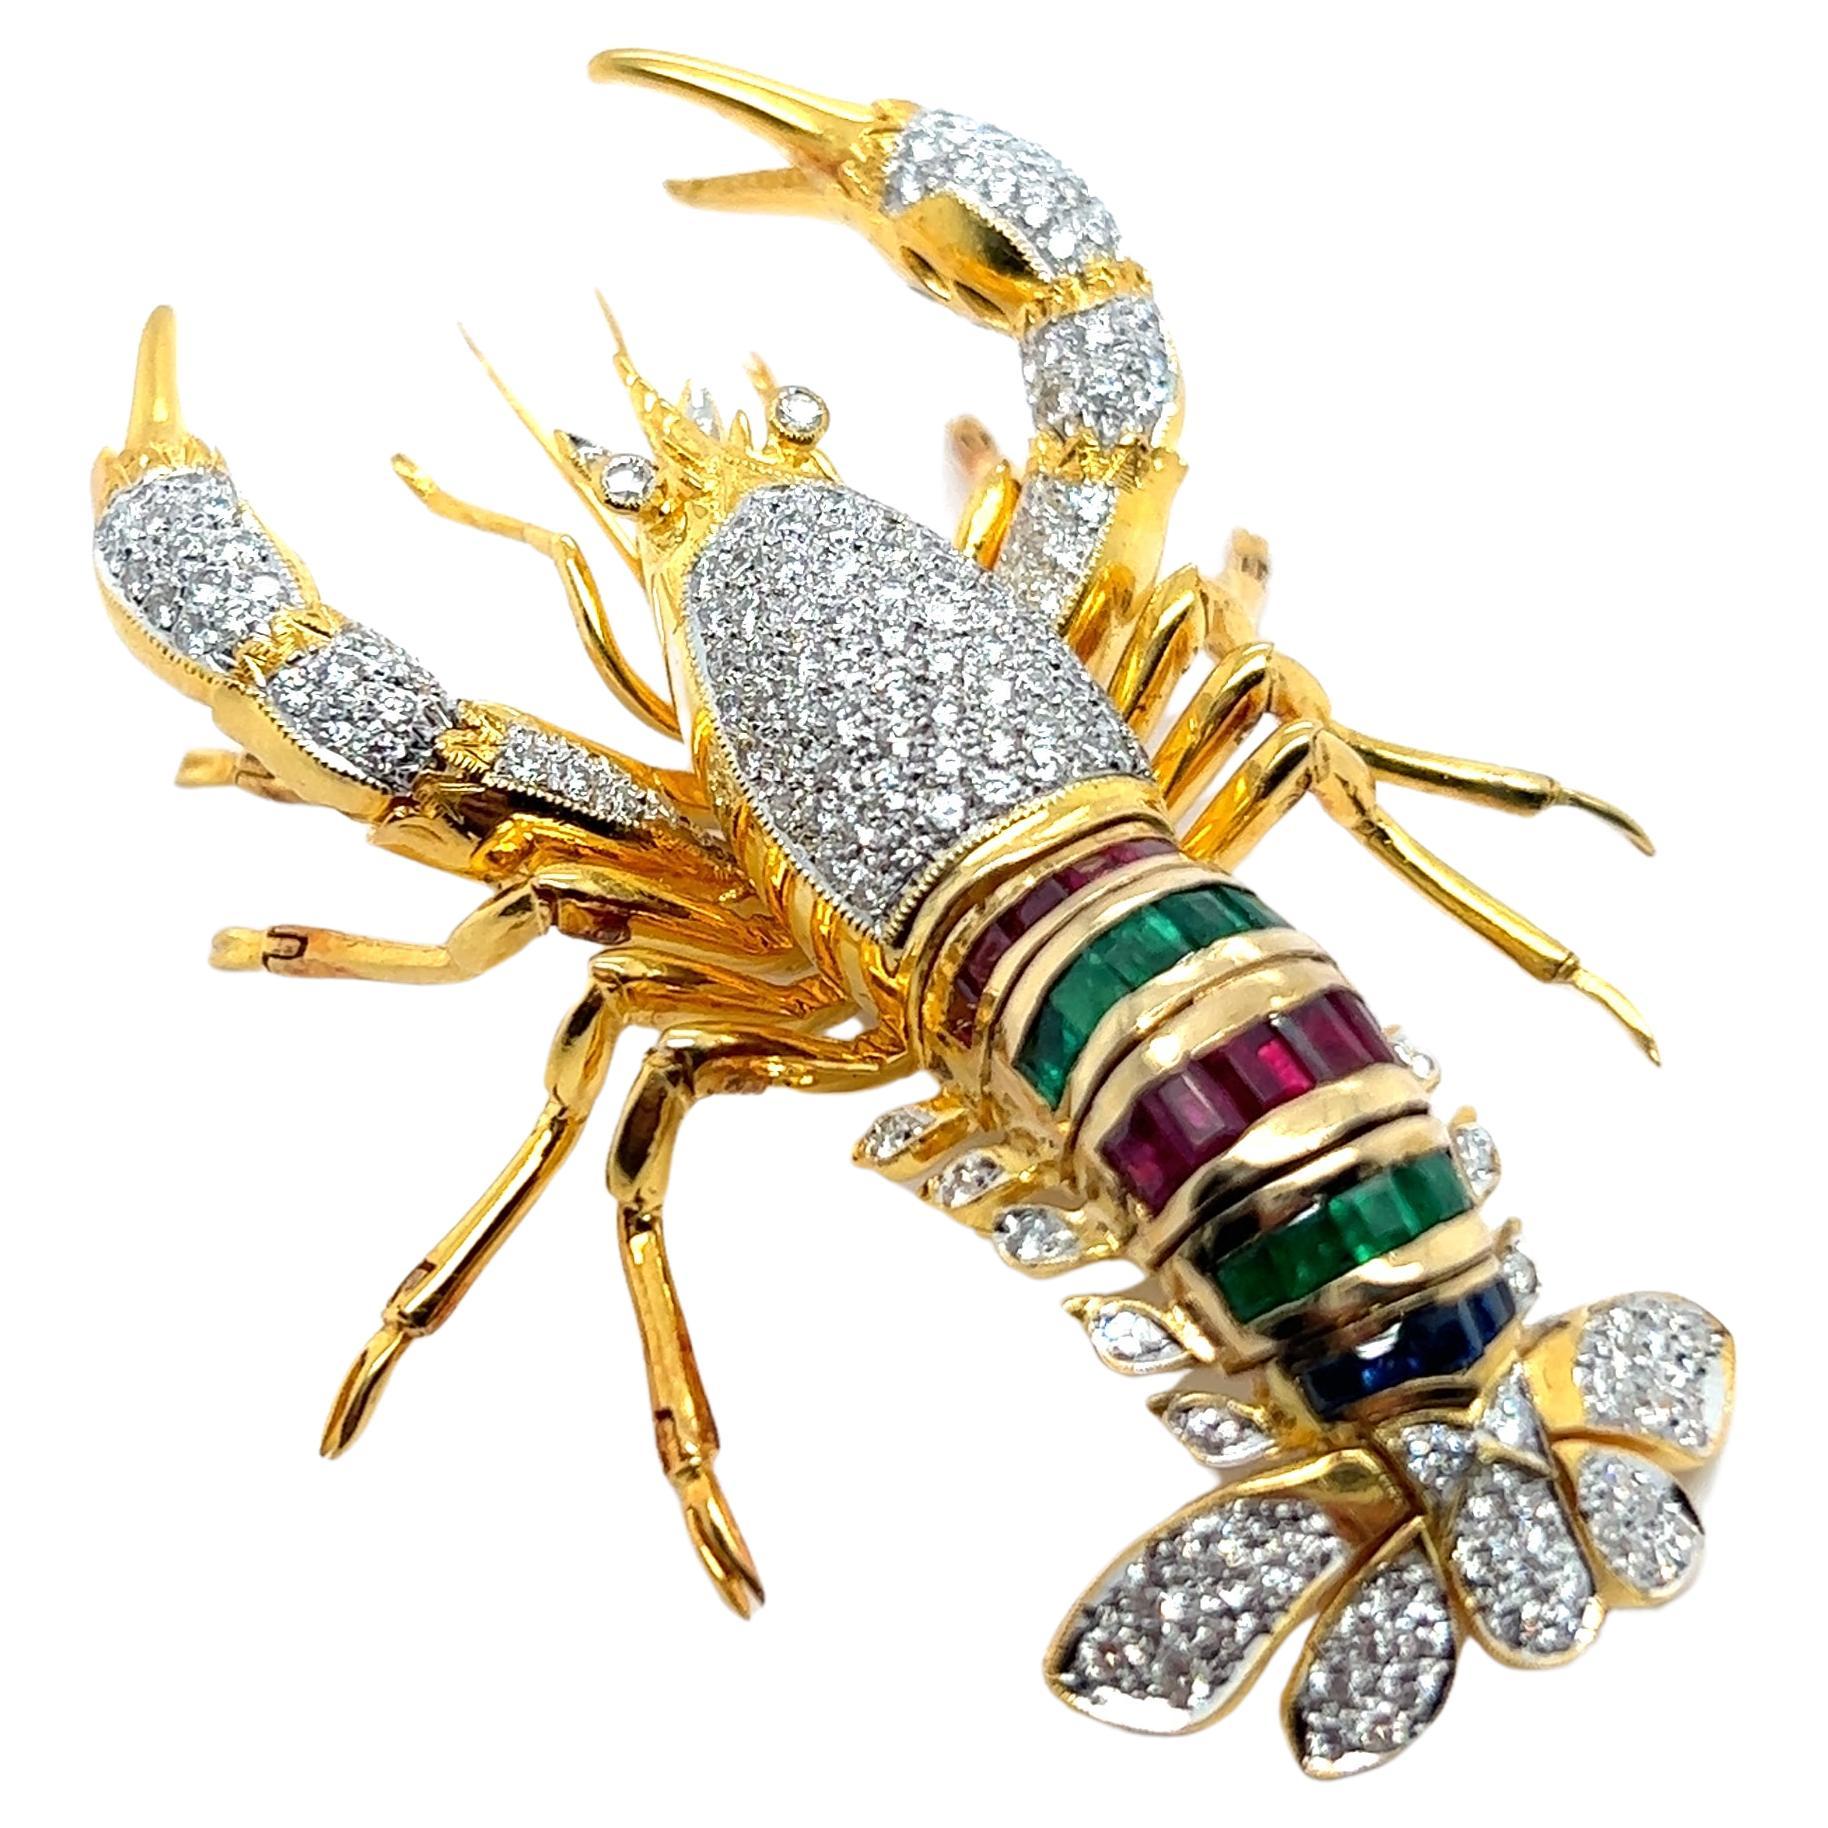 Lobster Brooch with Diamonds Rubies Emeralds & Sapphires in 18 Karat Yellow Gold